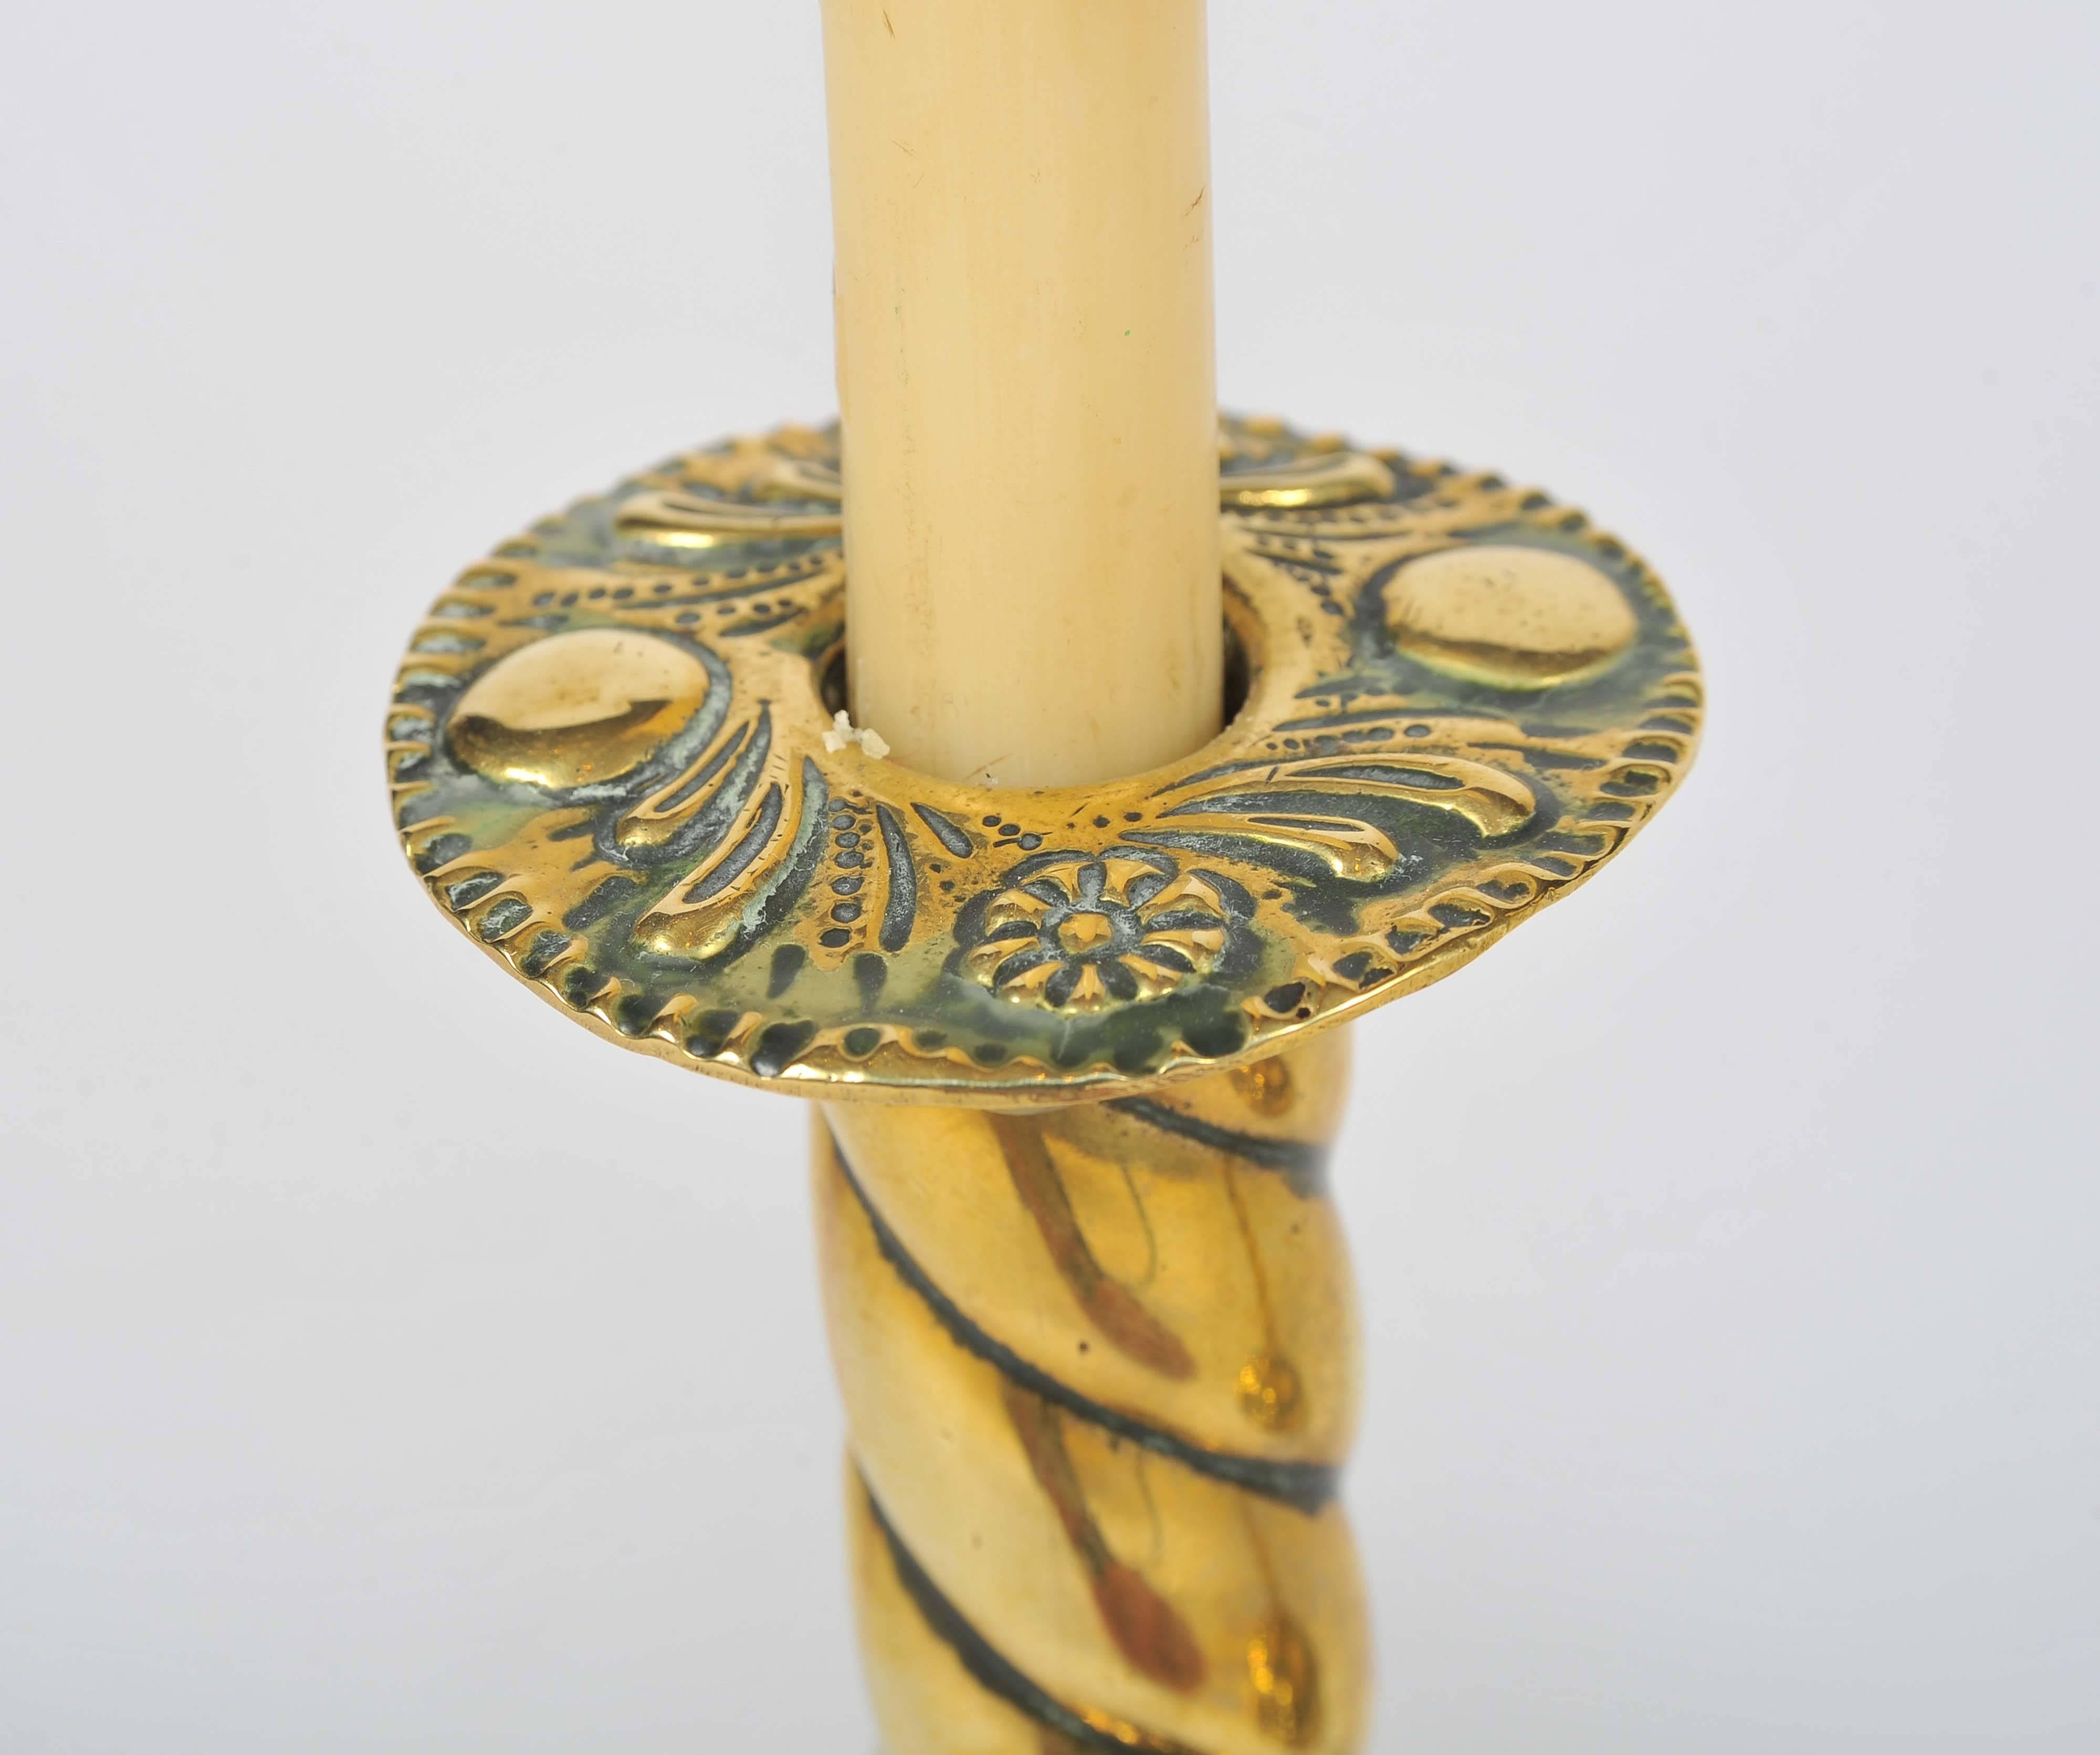 Brass Candlesticks, 19th Century, Twisted Stems and Decorative Rims and Bases In Good Condition For Sale In London, GB